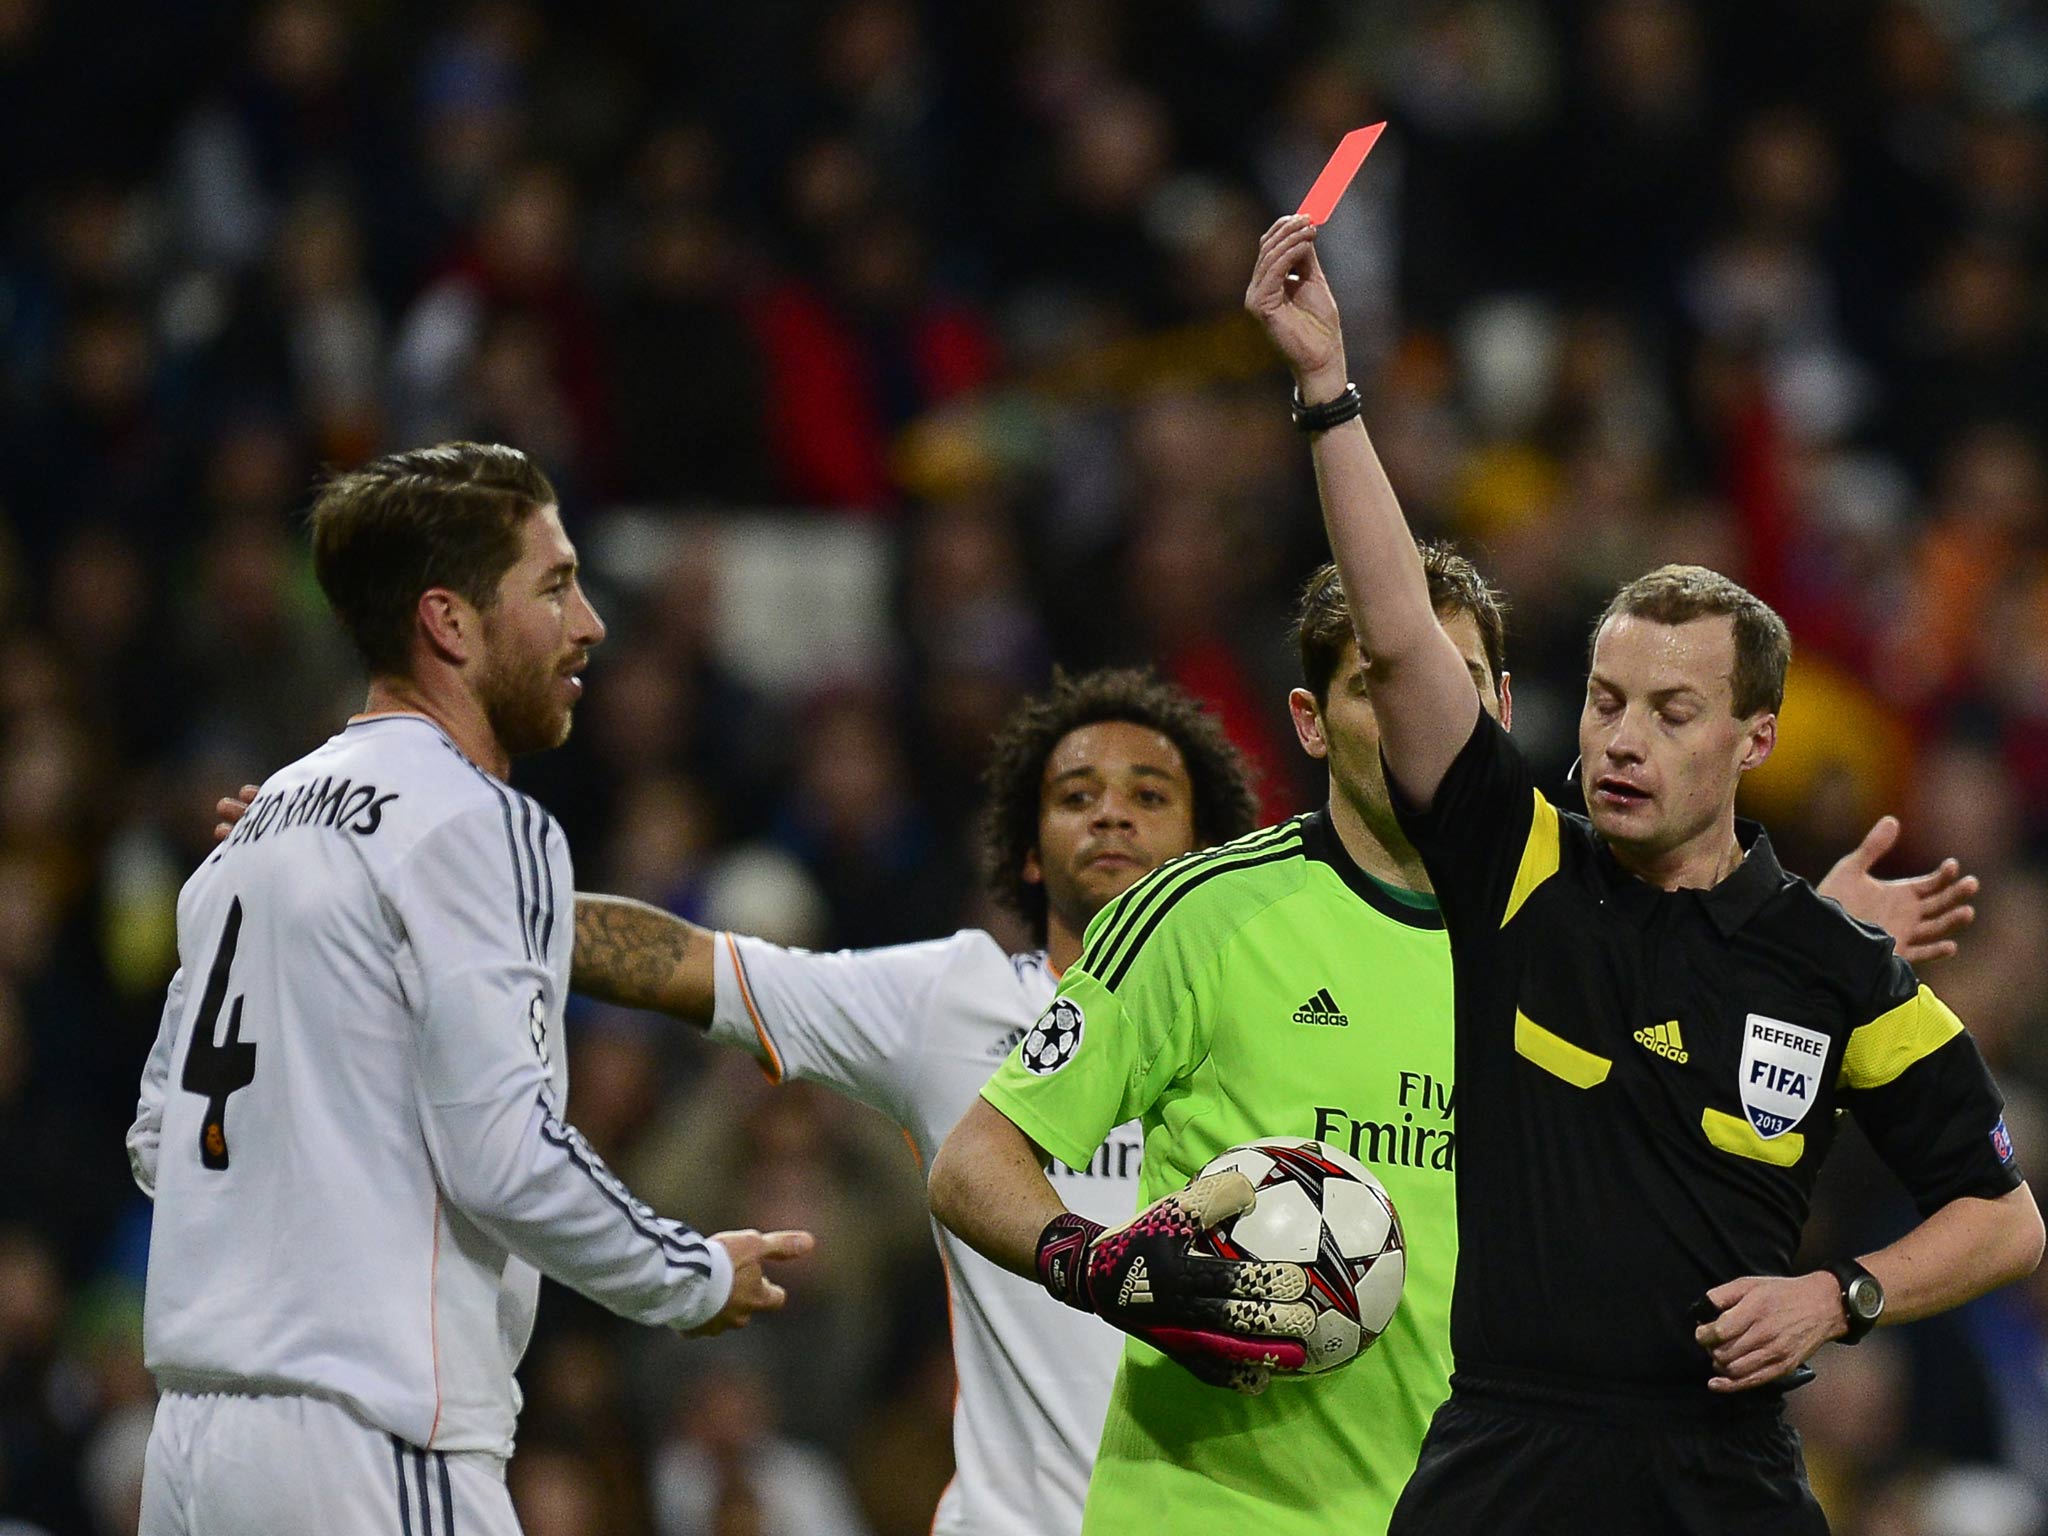 Referee shows a red card to Real Madrid's defender Sergio Ramos (L) during the UEFA Champions League football match Real Madrid CF vs Galatasaray SK at the Santiago Bernabeu